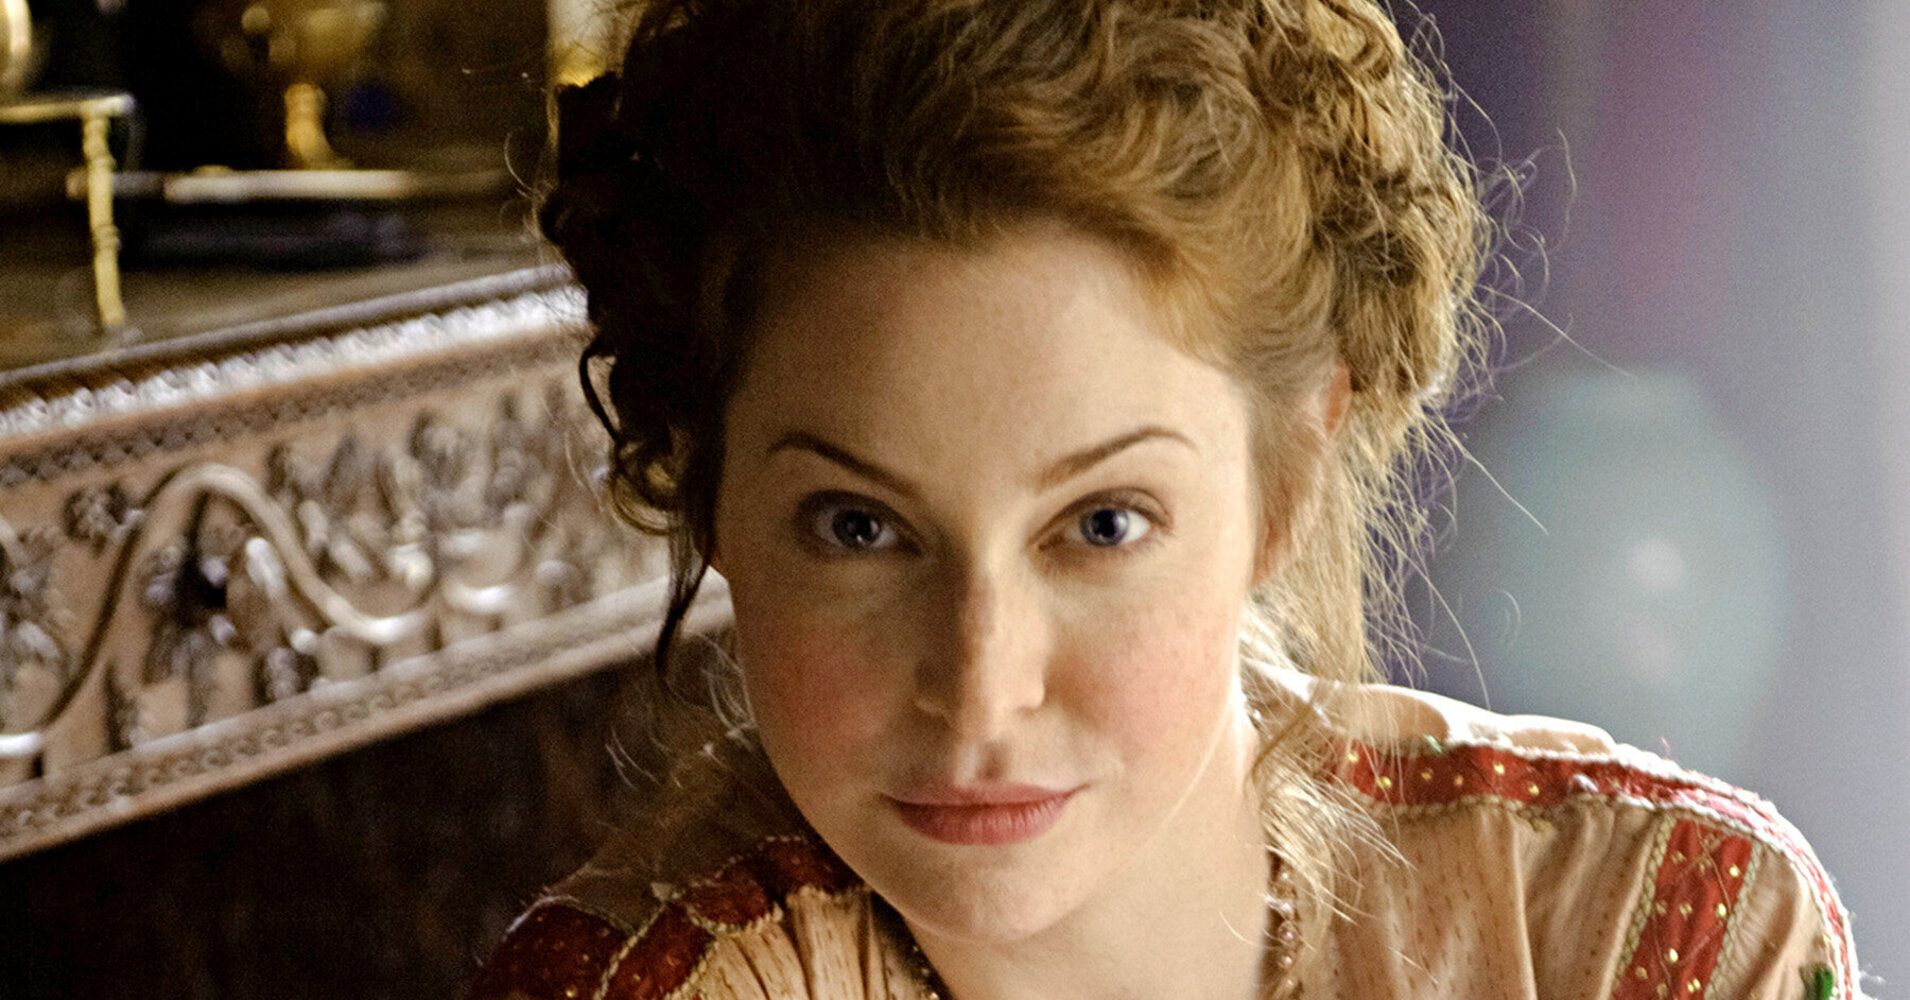 Esmé Bianco On What It’s Like To Film ‘game Of Thrones